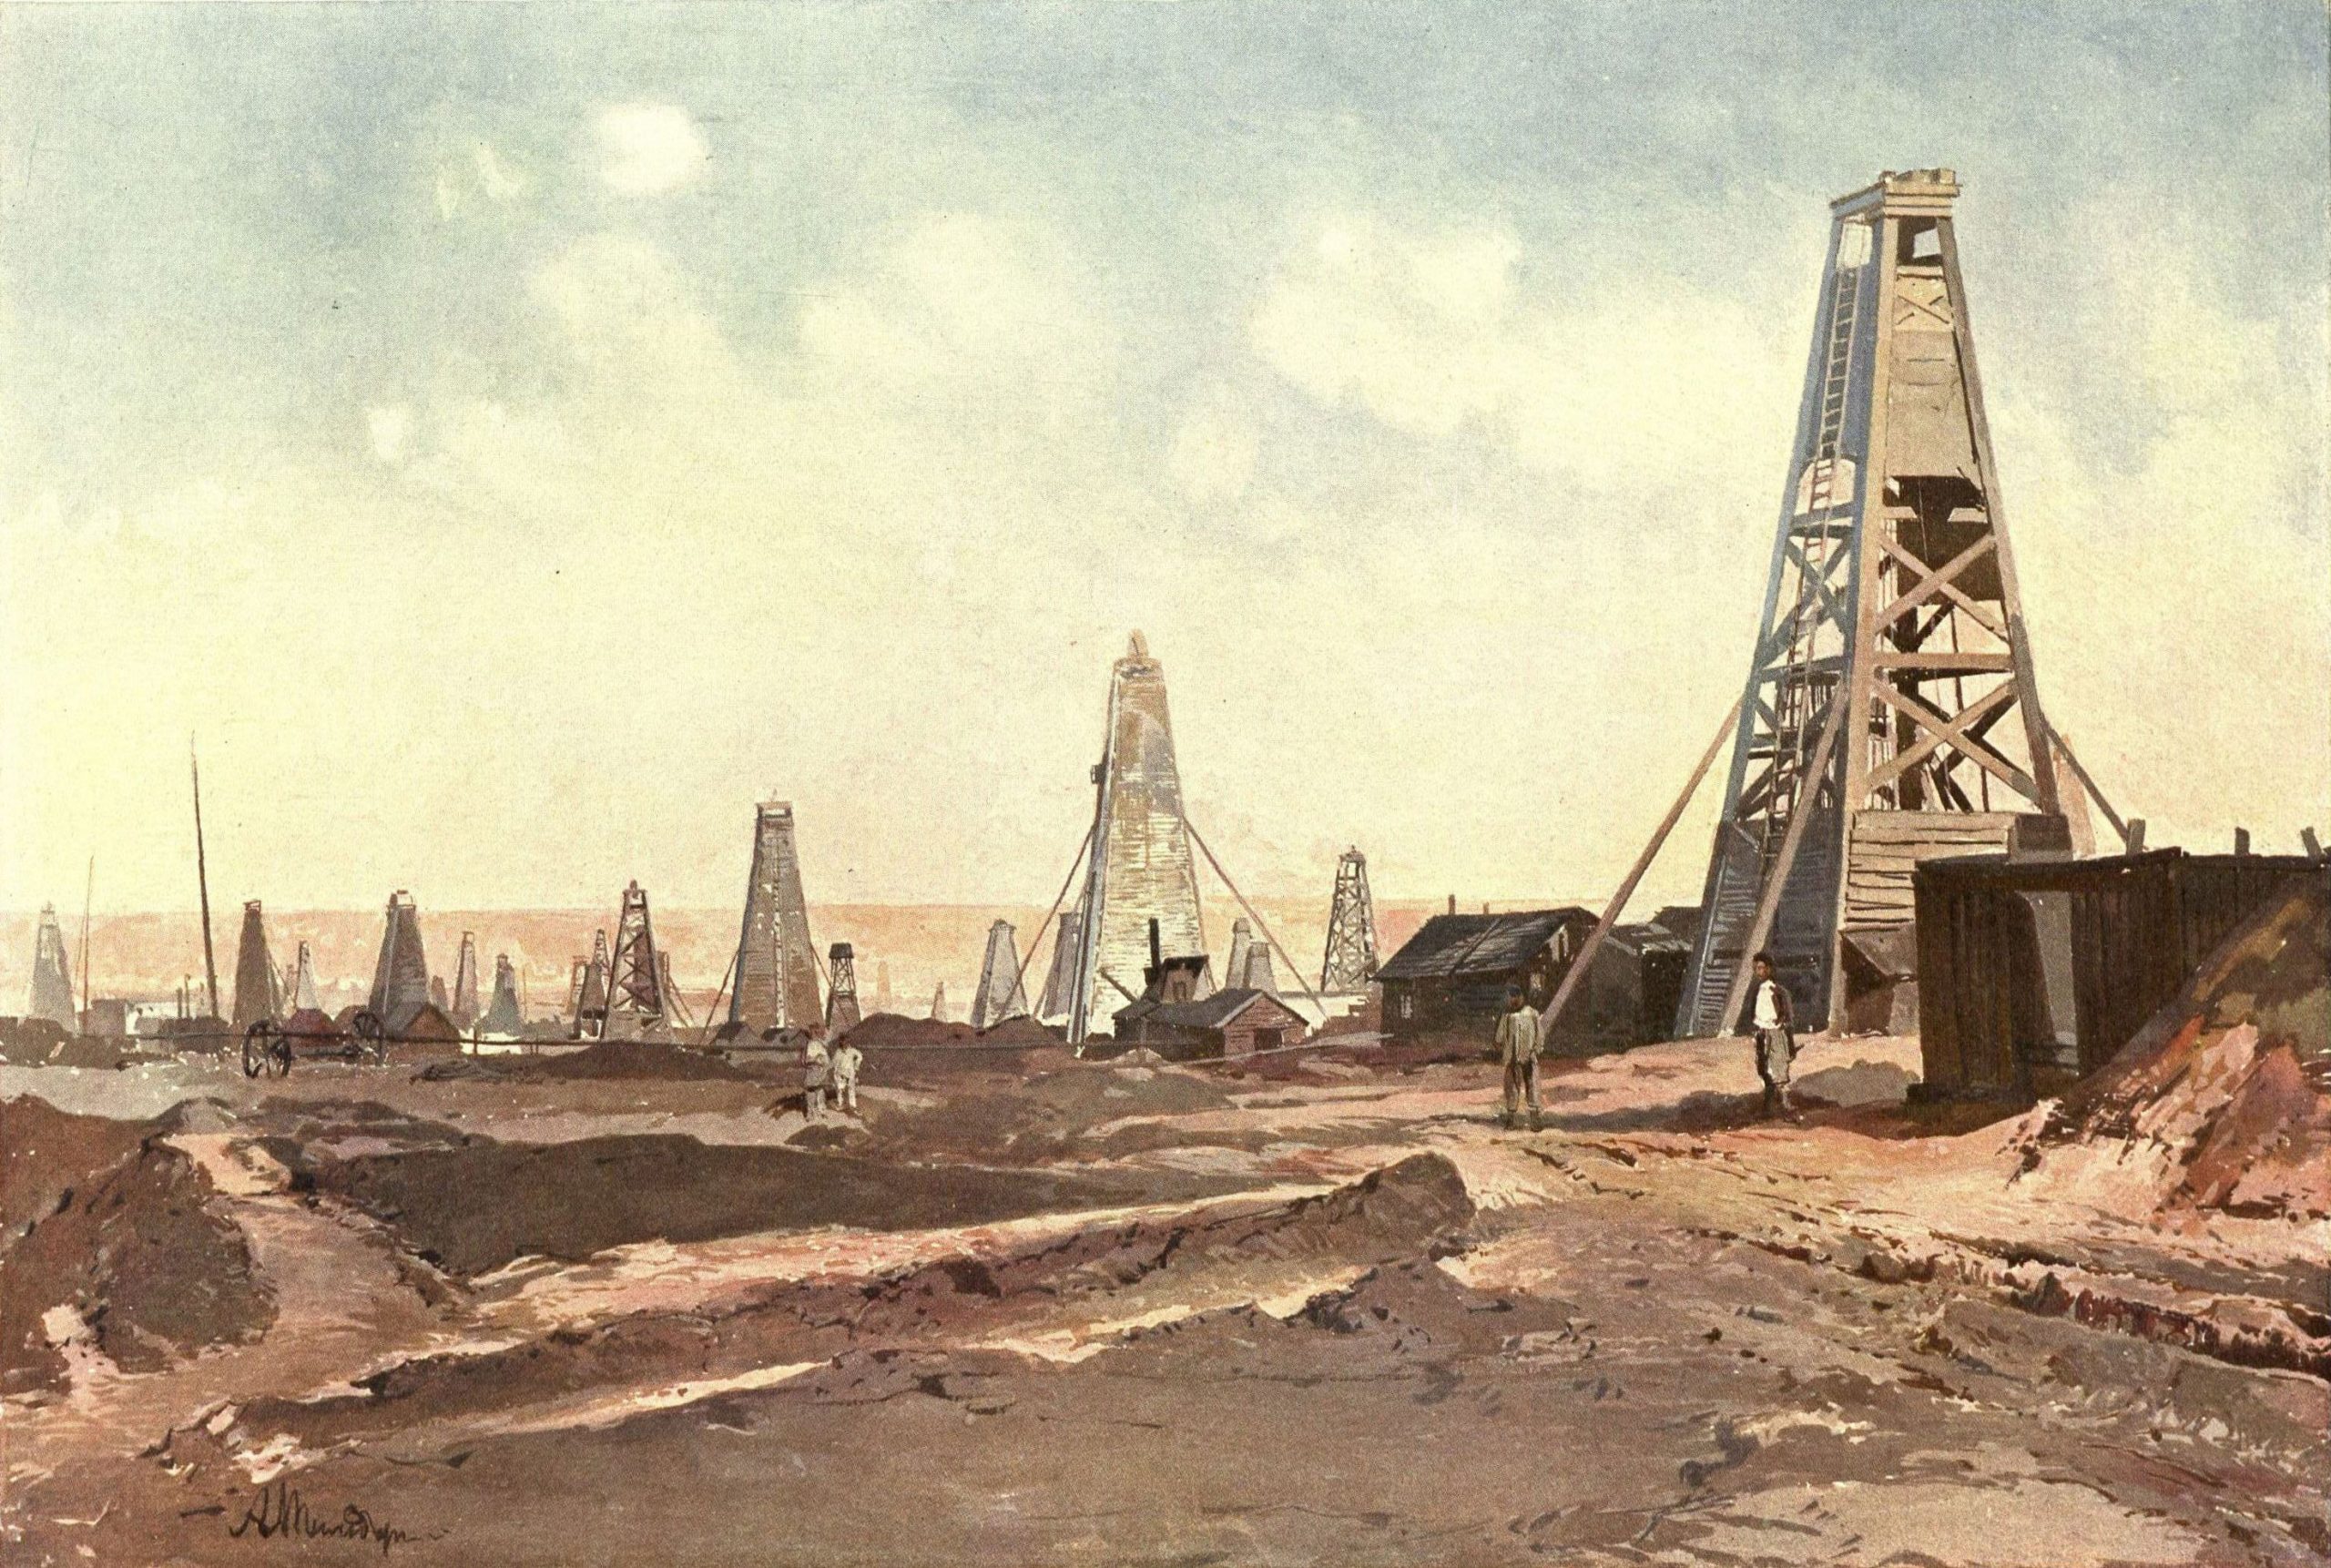 In the beginning, primitive methods were used on the oilfields in Baku, but the technological developments soon began to make the extraction and distillation of oil more efficient.